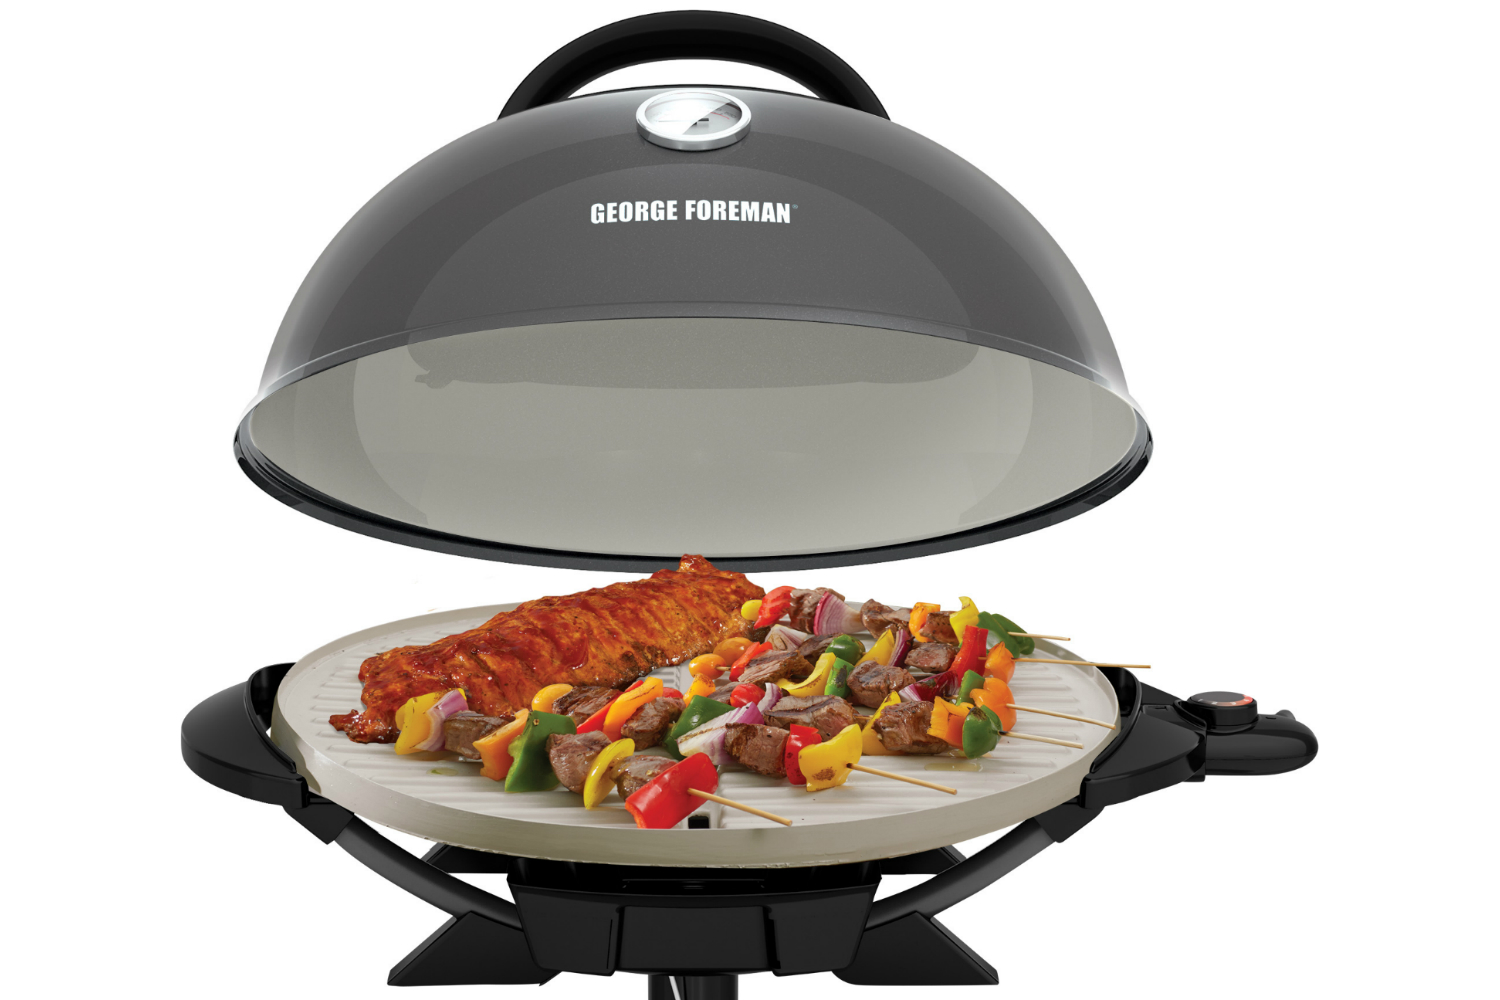 https://www.digitaltrends.com/wp-content/uploads/2019/05/george-foreman-15-serving-indoor-outdoor-electric-grill-with-ceramic-plates-3.jpg?p=1